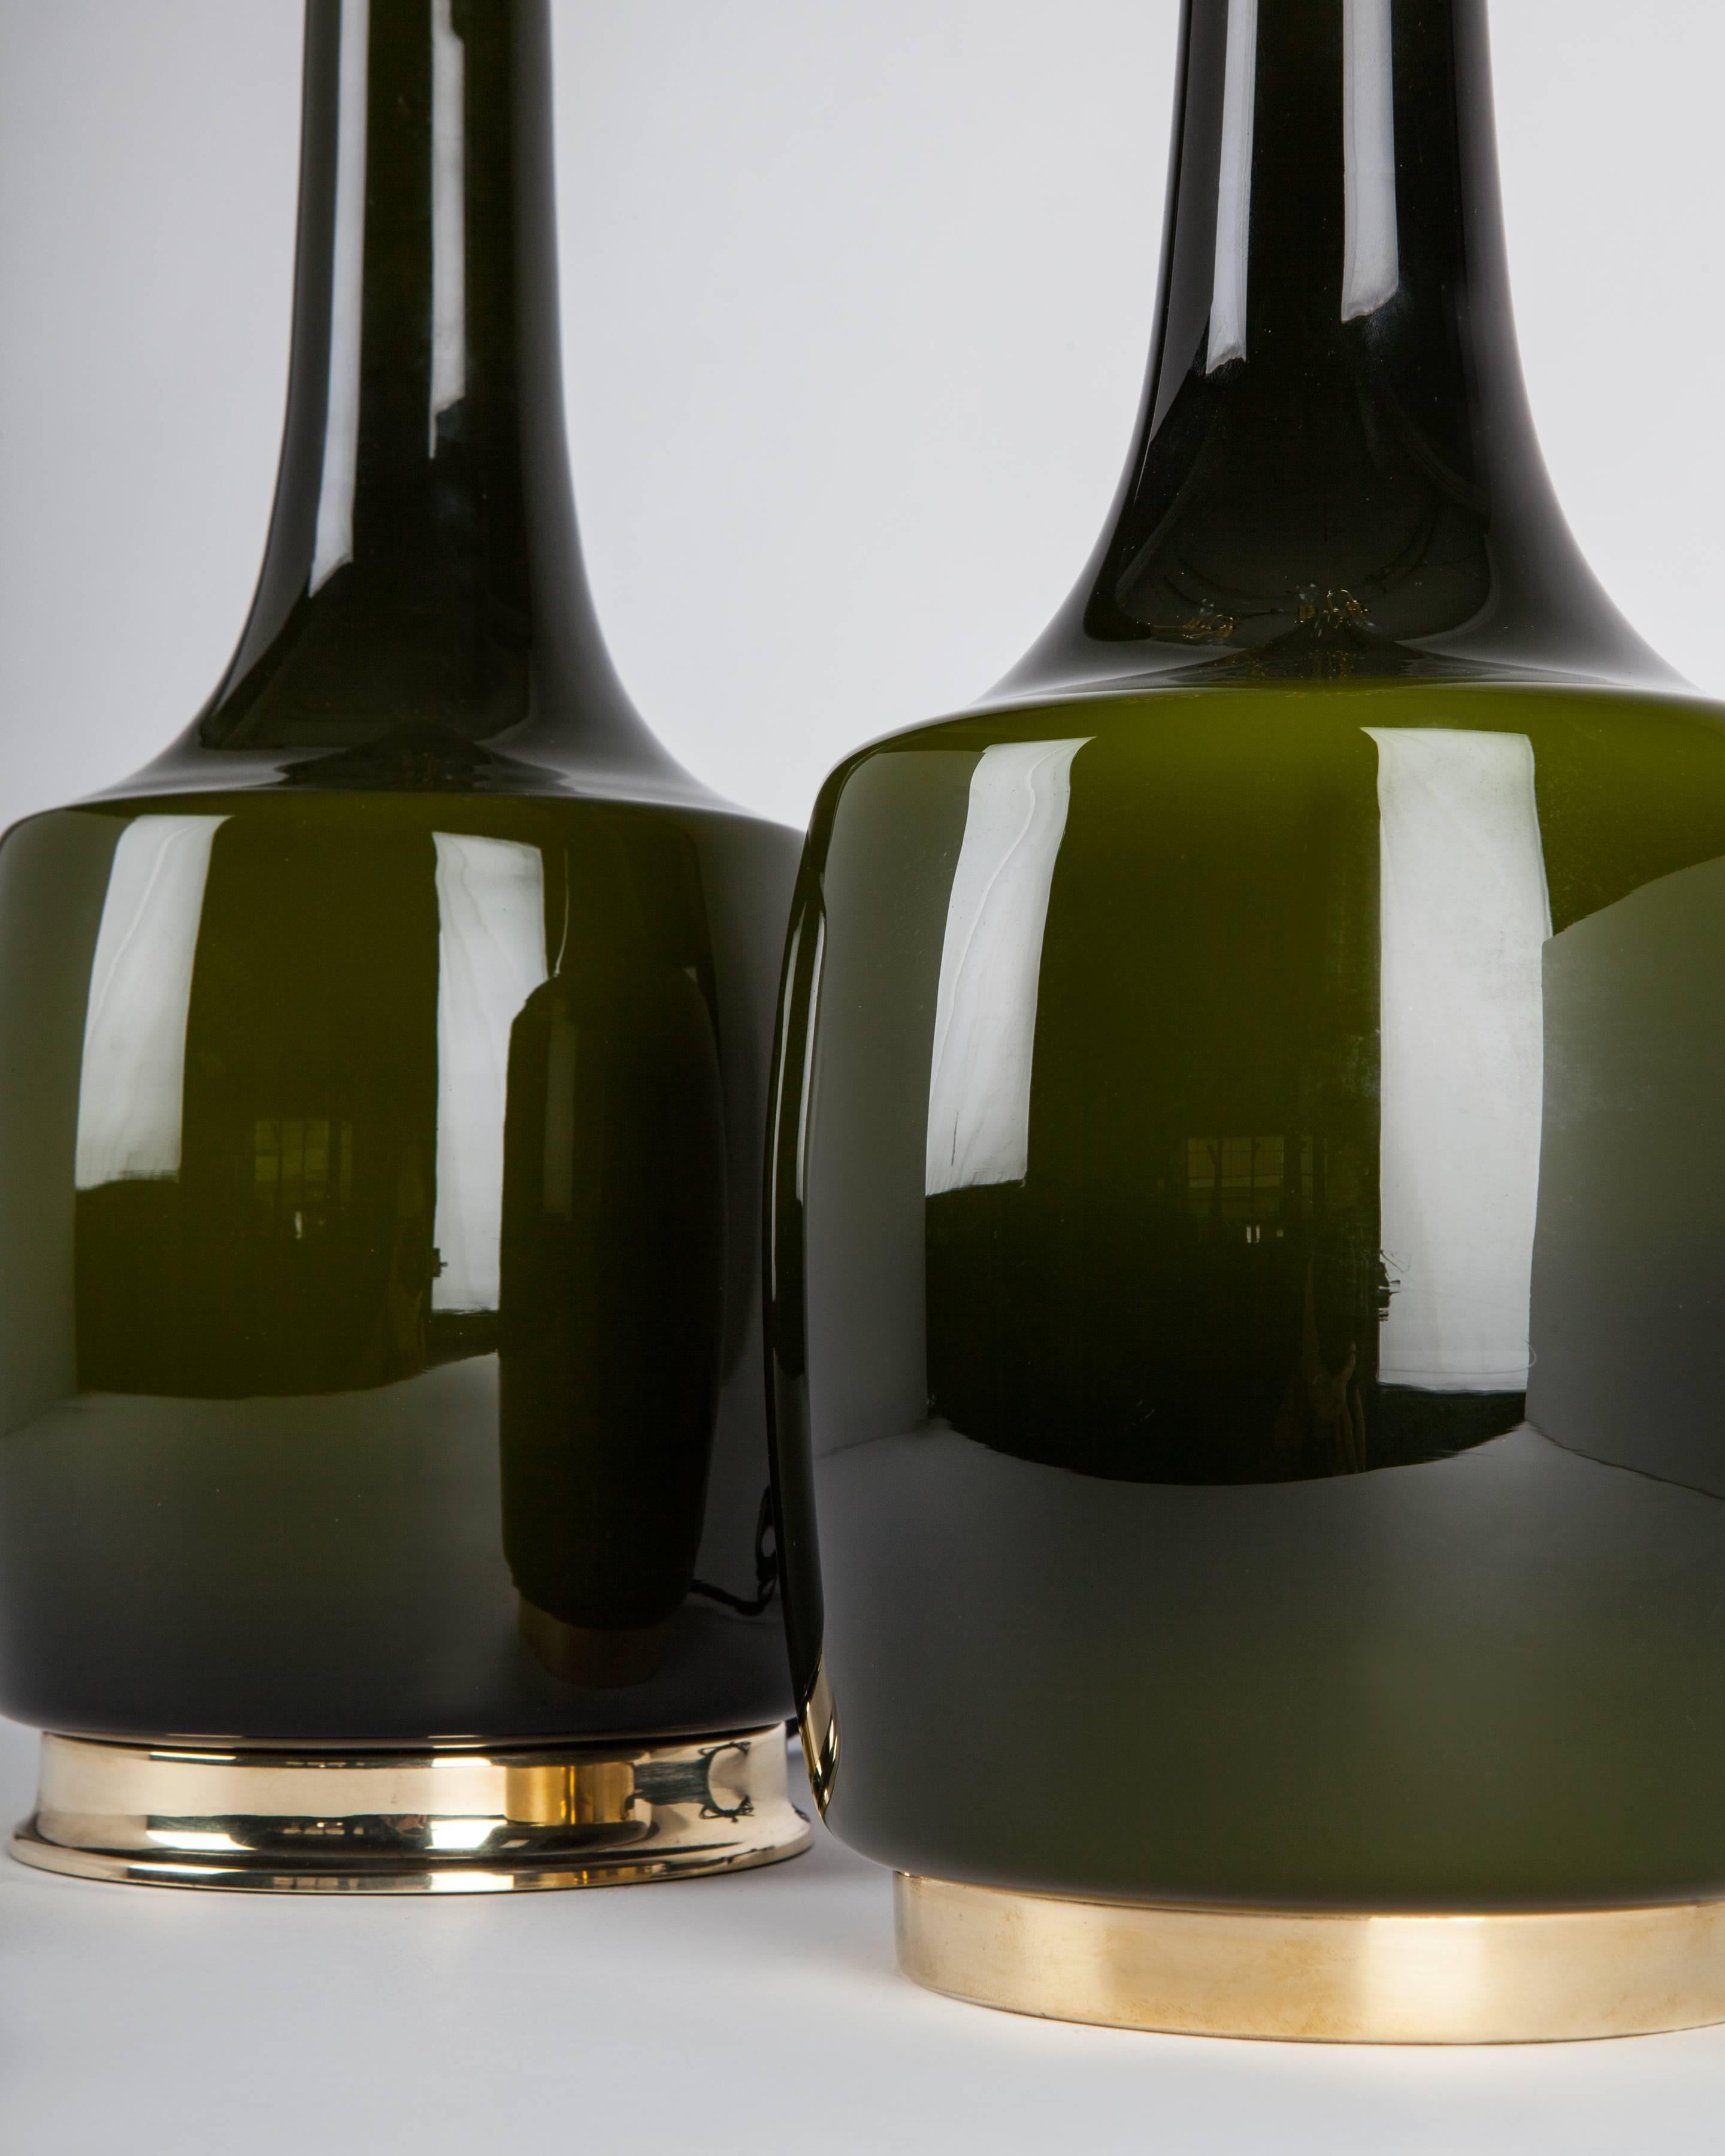 ATL1955
A pair of tall vintage green cased glass table lamps having polished brass fittings. Signed by the Swedish maker Bergboms, the glass bearing Holmegaard's Danish export stamp. Due to the antique nature of these fixtures there are nicks and